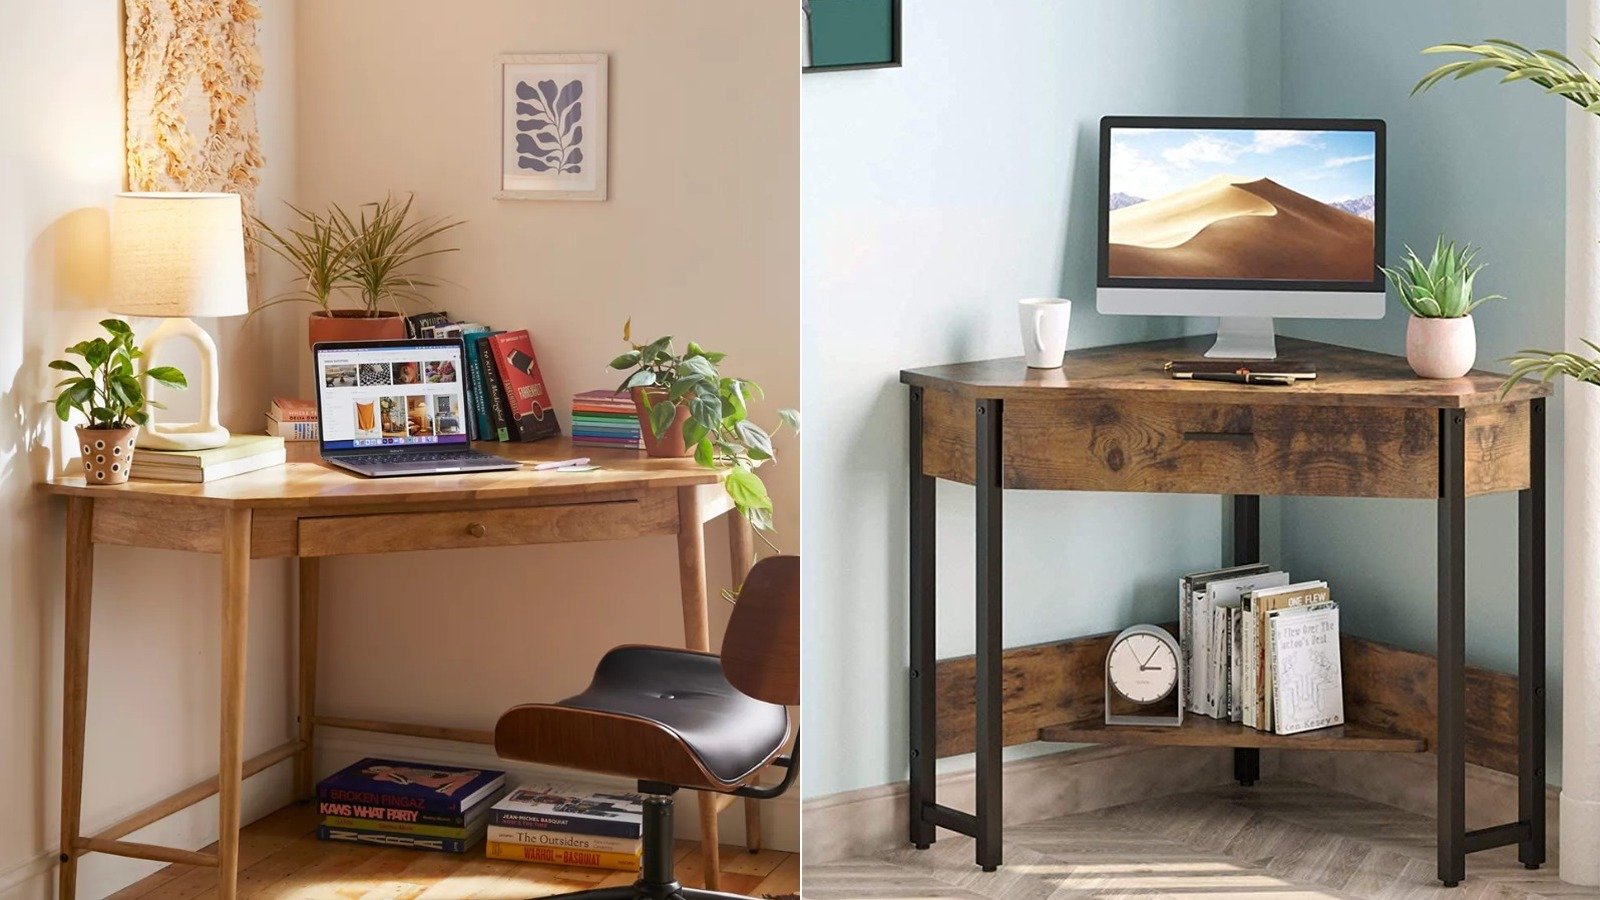 These Are More Affordable Dupes For Home Items From Urban Outfitters